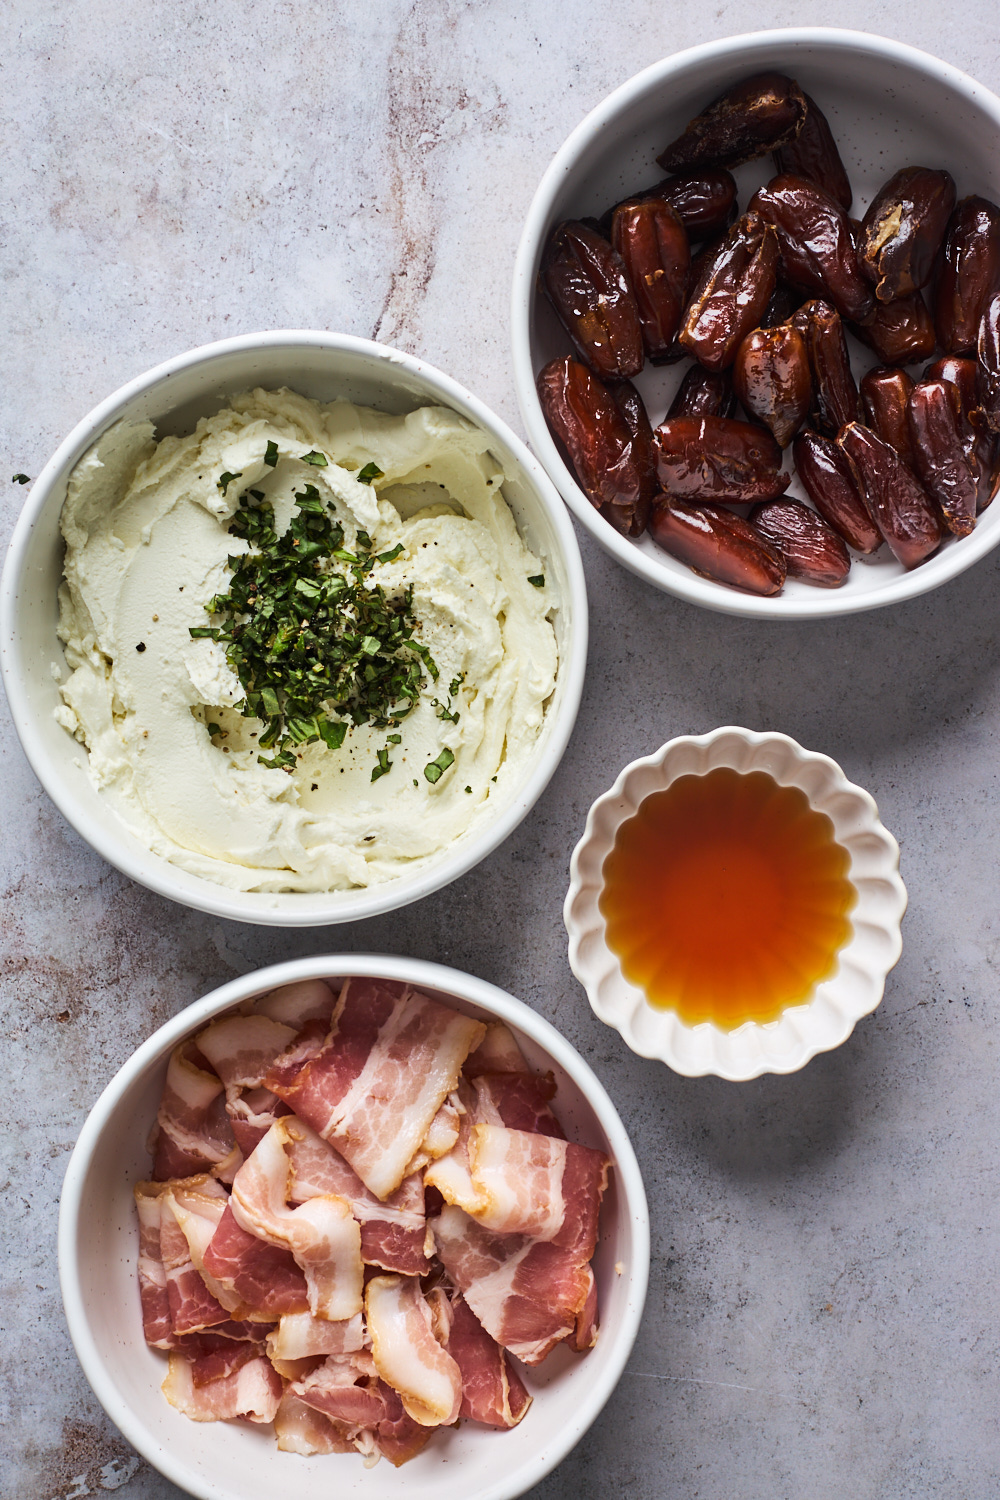 Bacon Wrapped Goat Cheese stuffed Dates recipe ingredients